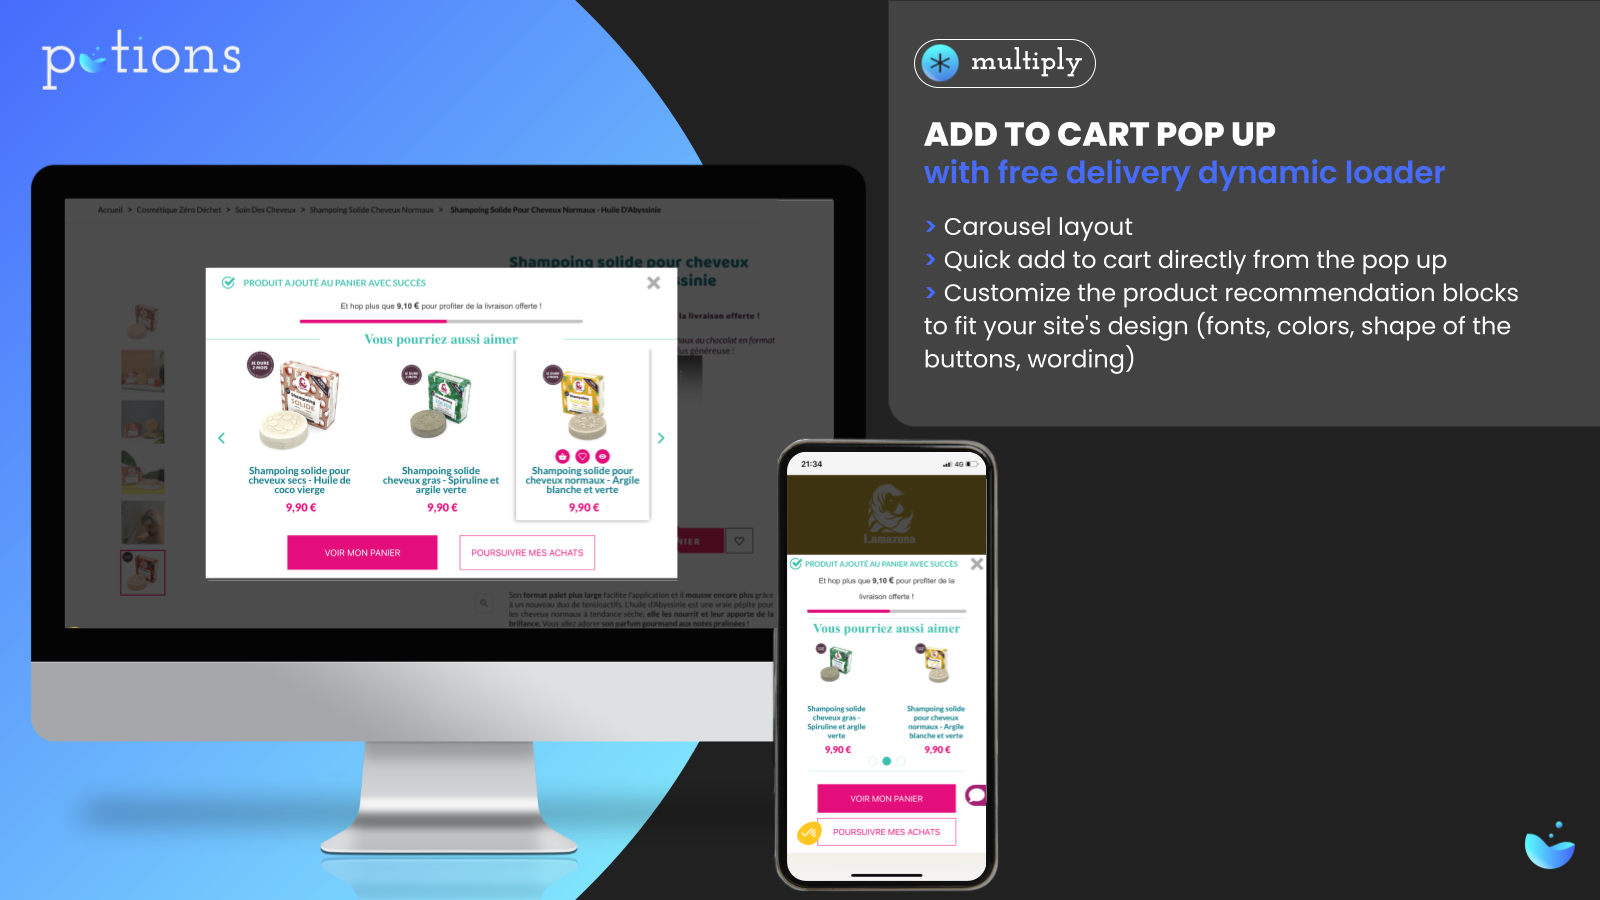 Add-to-cart pop-up recommendations with free delivery bar